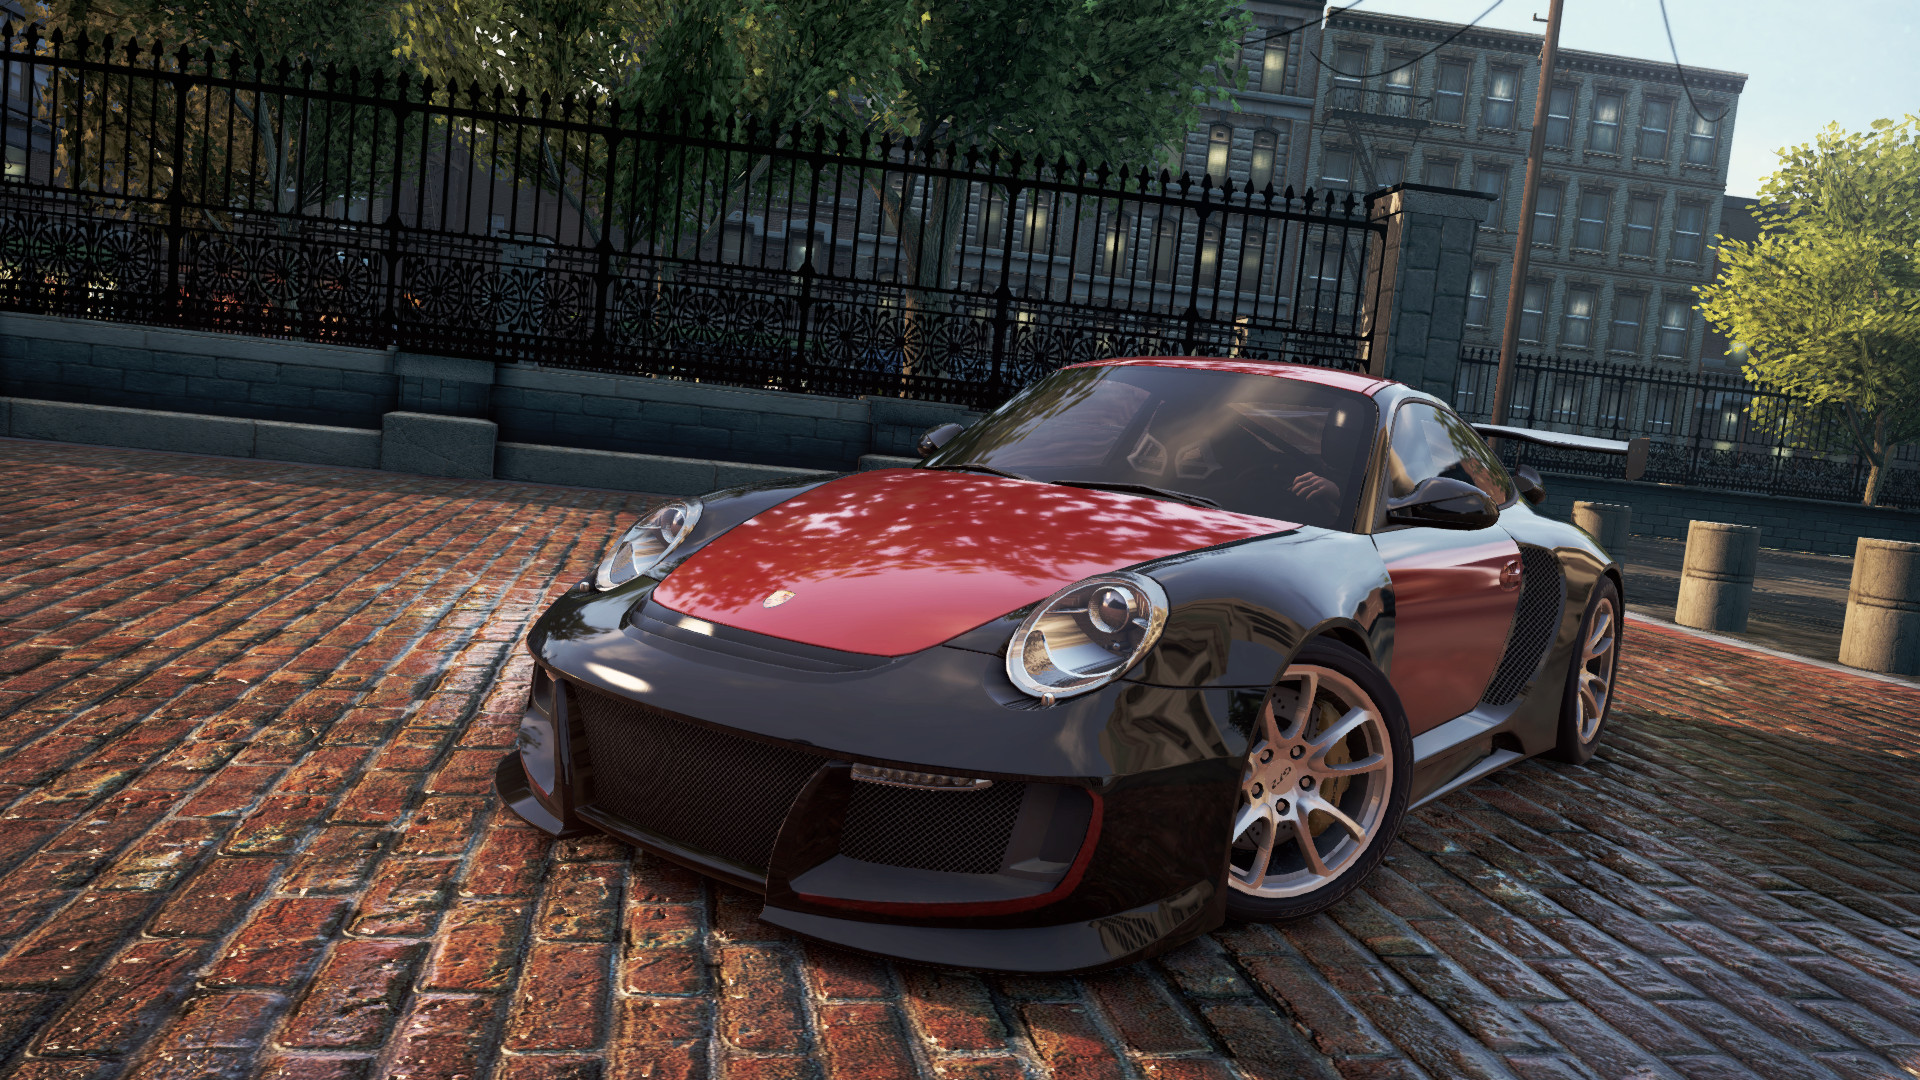 NFSMW12 - Widebody Rose's GT2 Improved Livery